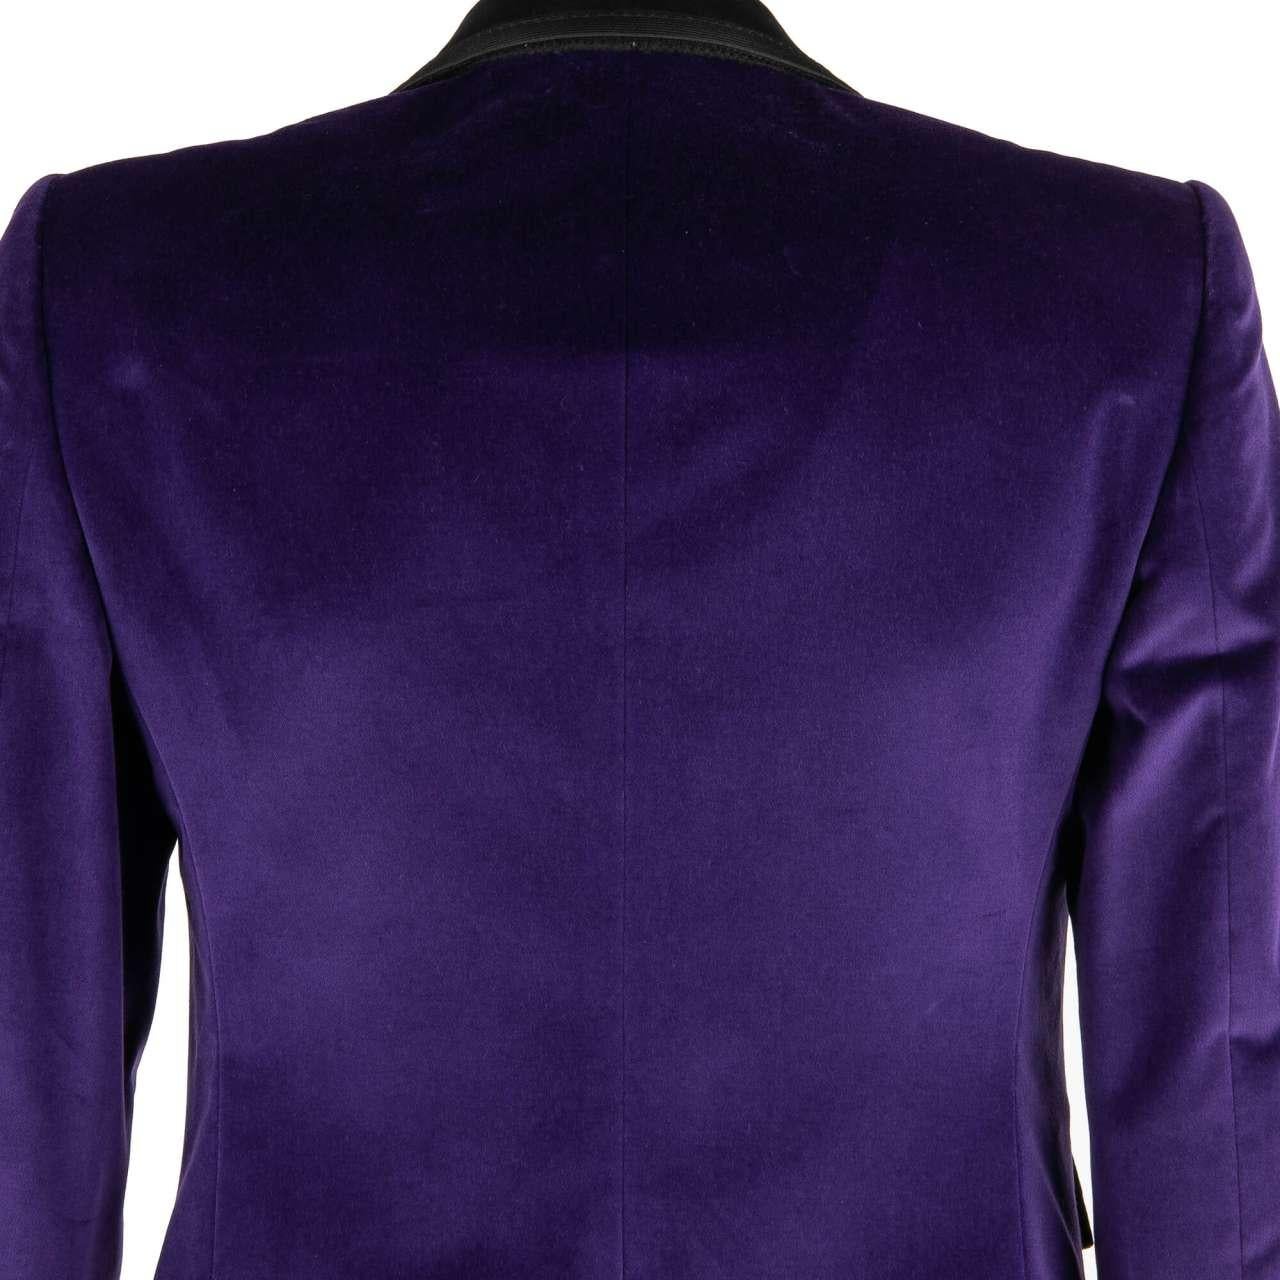 D&G Velvet Tuxedo Blazer with Crystals, Pearls and Sequins Purple Black 46 For Sale 2